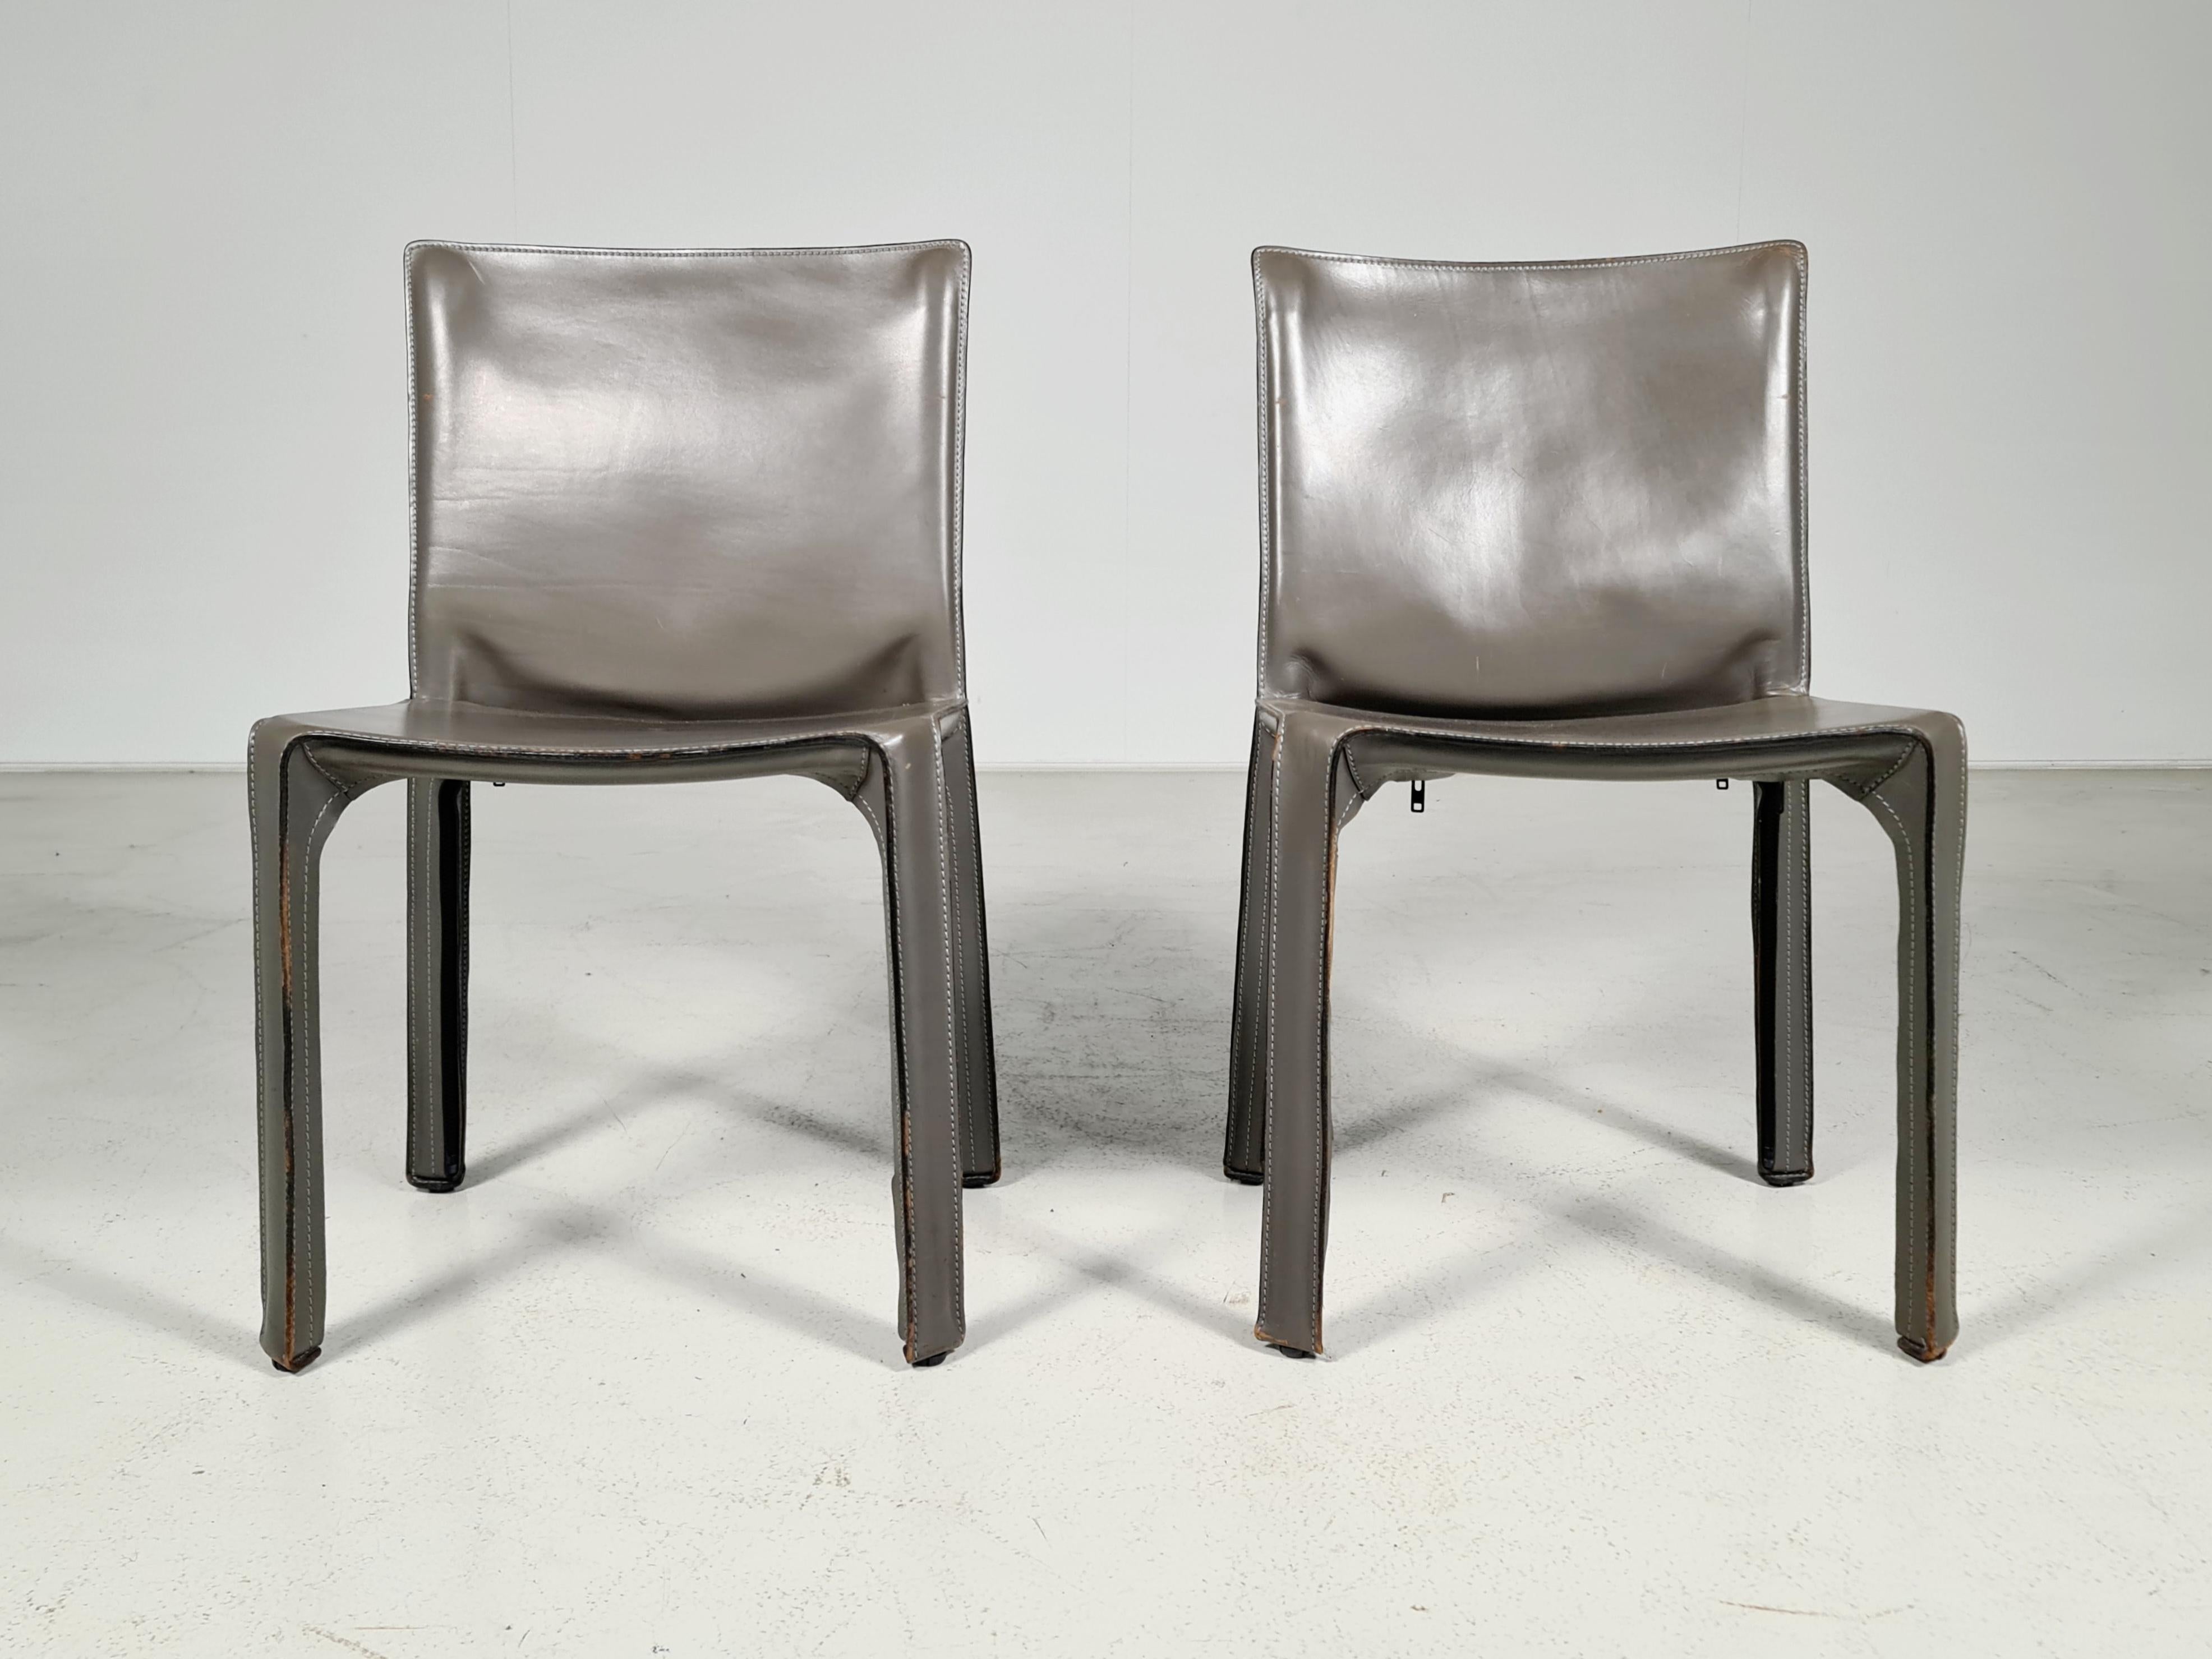 Set of 2 CAB-412 dining room chairs in Elephant grey saddle leather. Designed by Mario Bellini and manufactured by Cassina in the 1970s in Italy. These chairs are the early edition. The leather cover is stretched over a minimal tubular steel frame.